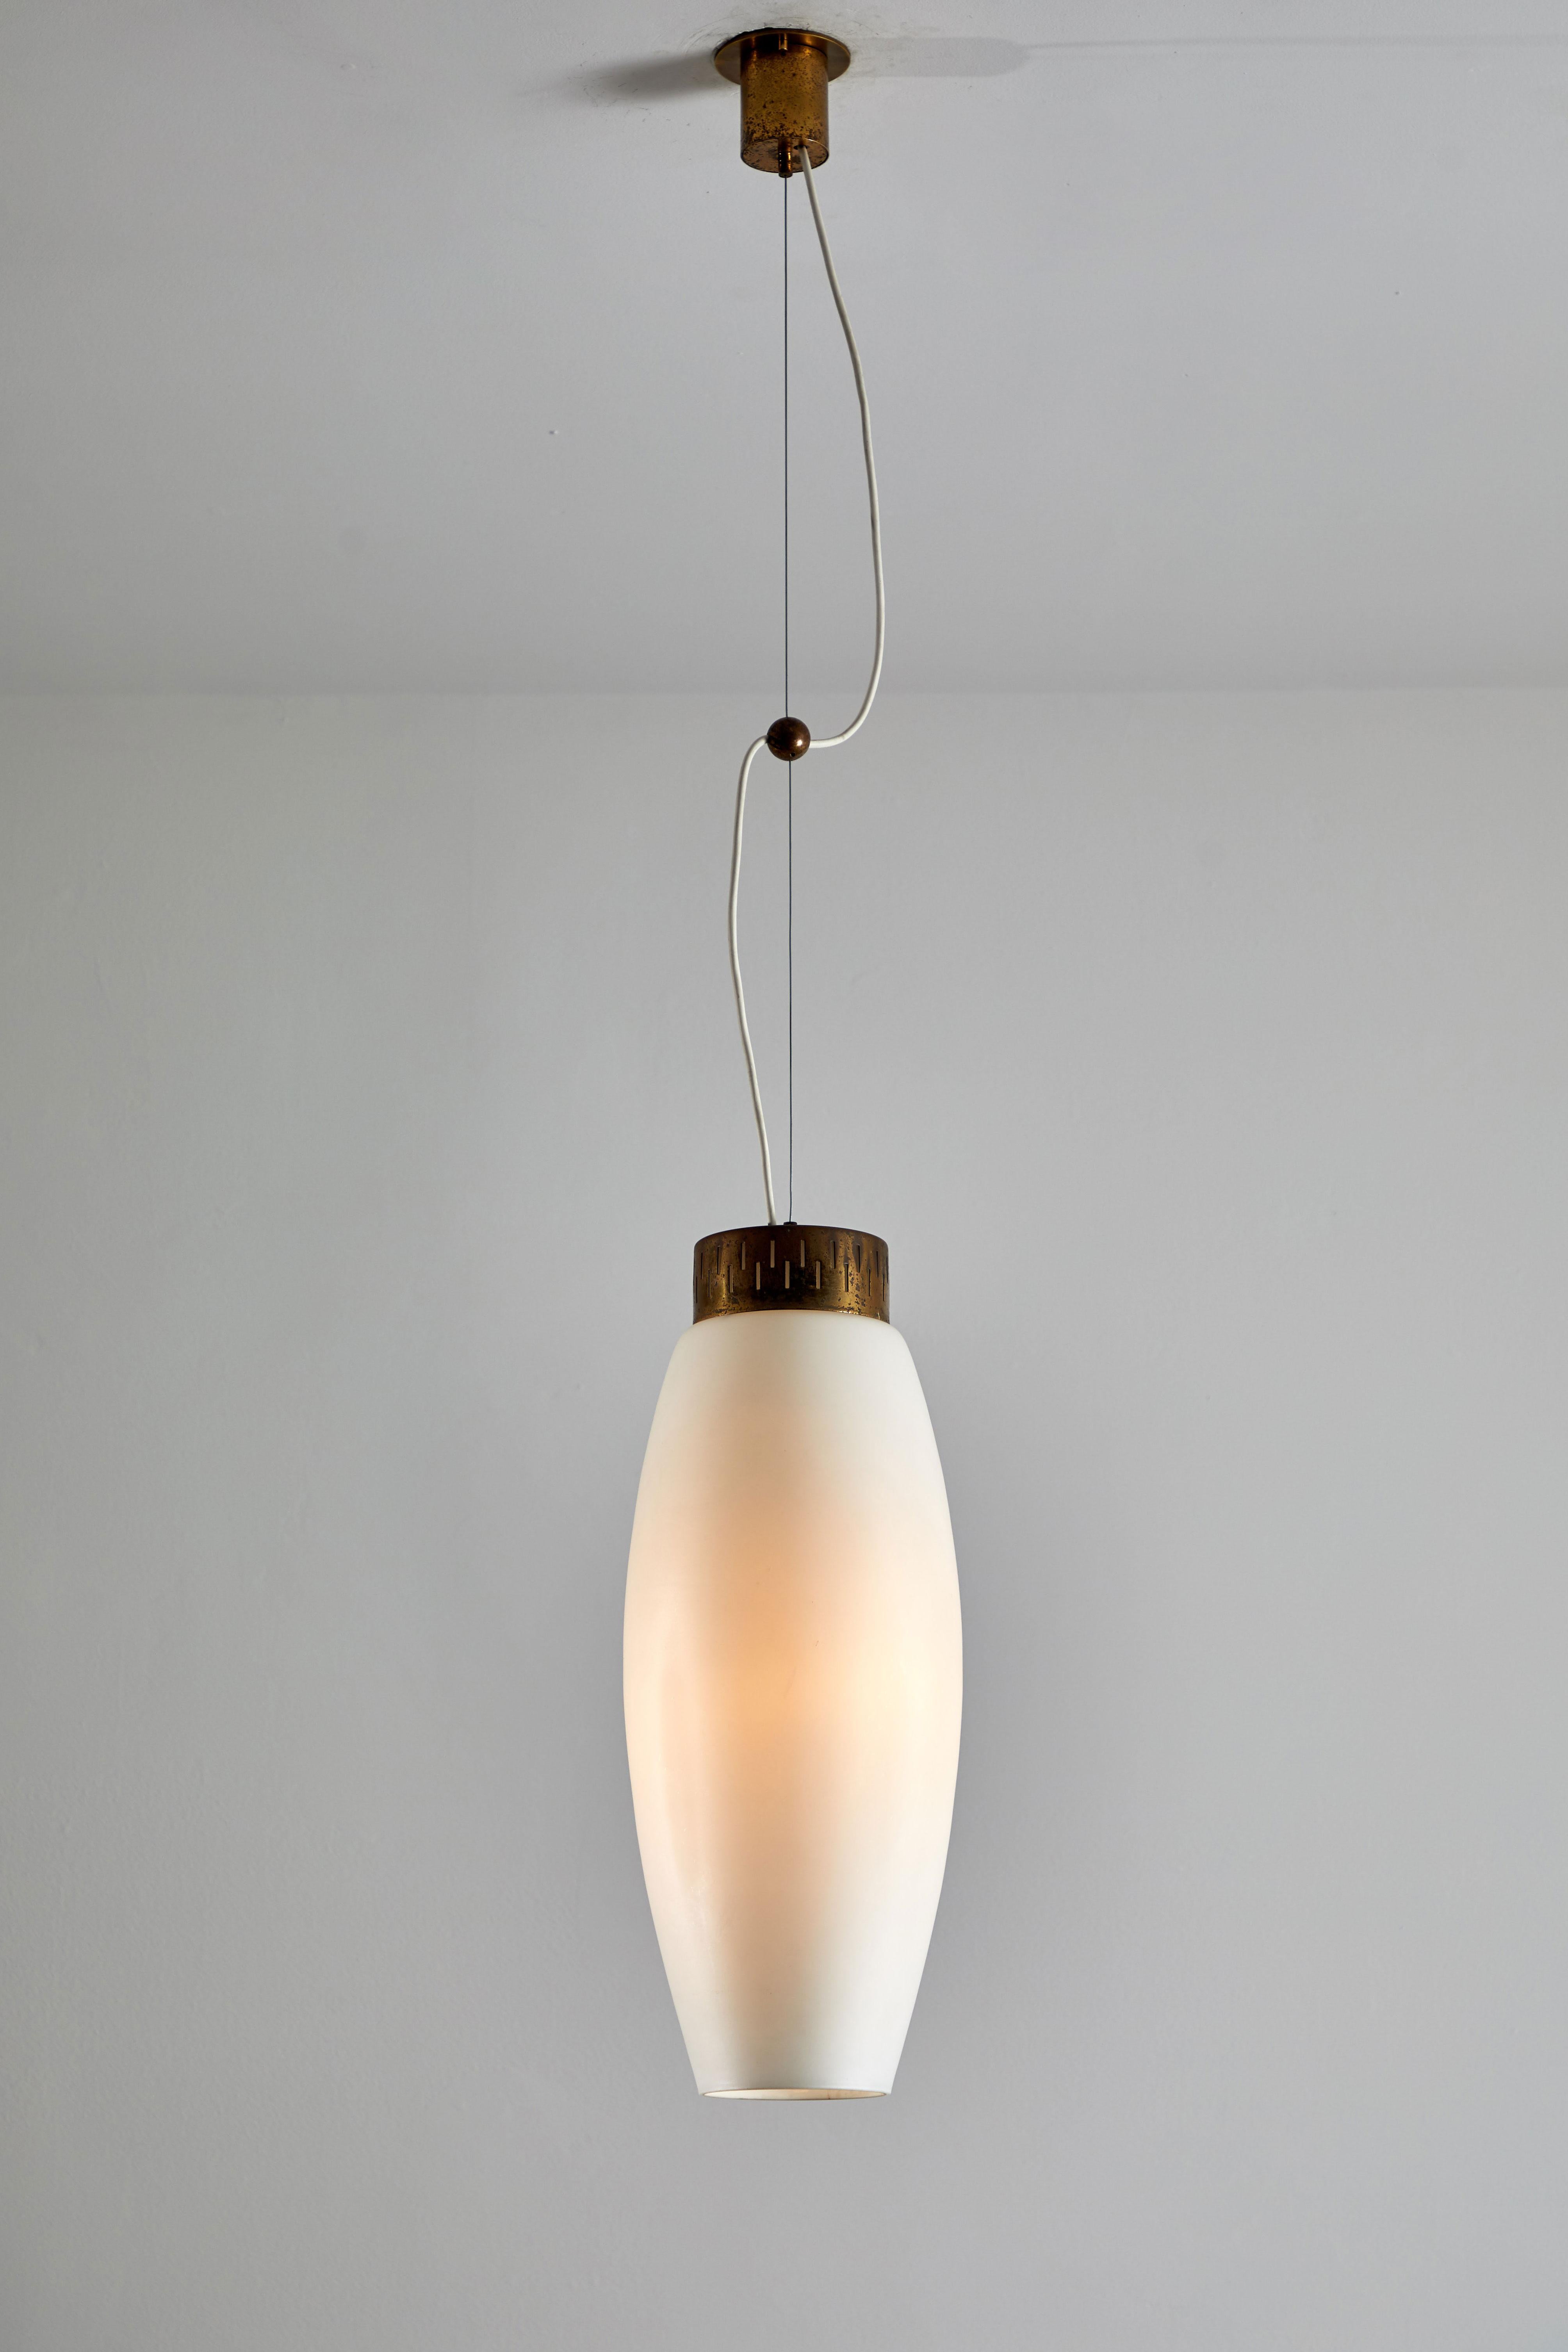 Suspension pendant by Stilnovo. Manufactured in Italy circa 1960s. Brushed satin glass diffuser, brass hardware, original brass canopy with custom brass ceiling plate. Rewired for US junction boxes. Takes one E27 75 W maximum bulb. Overall drop can